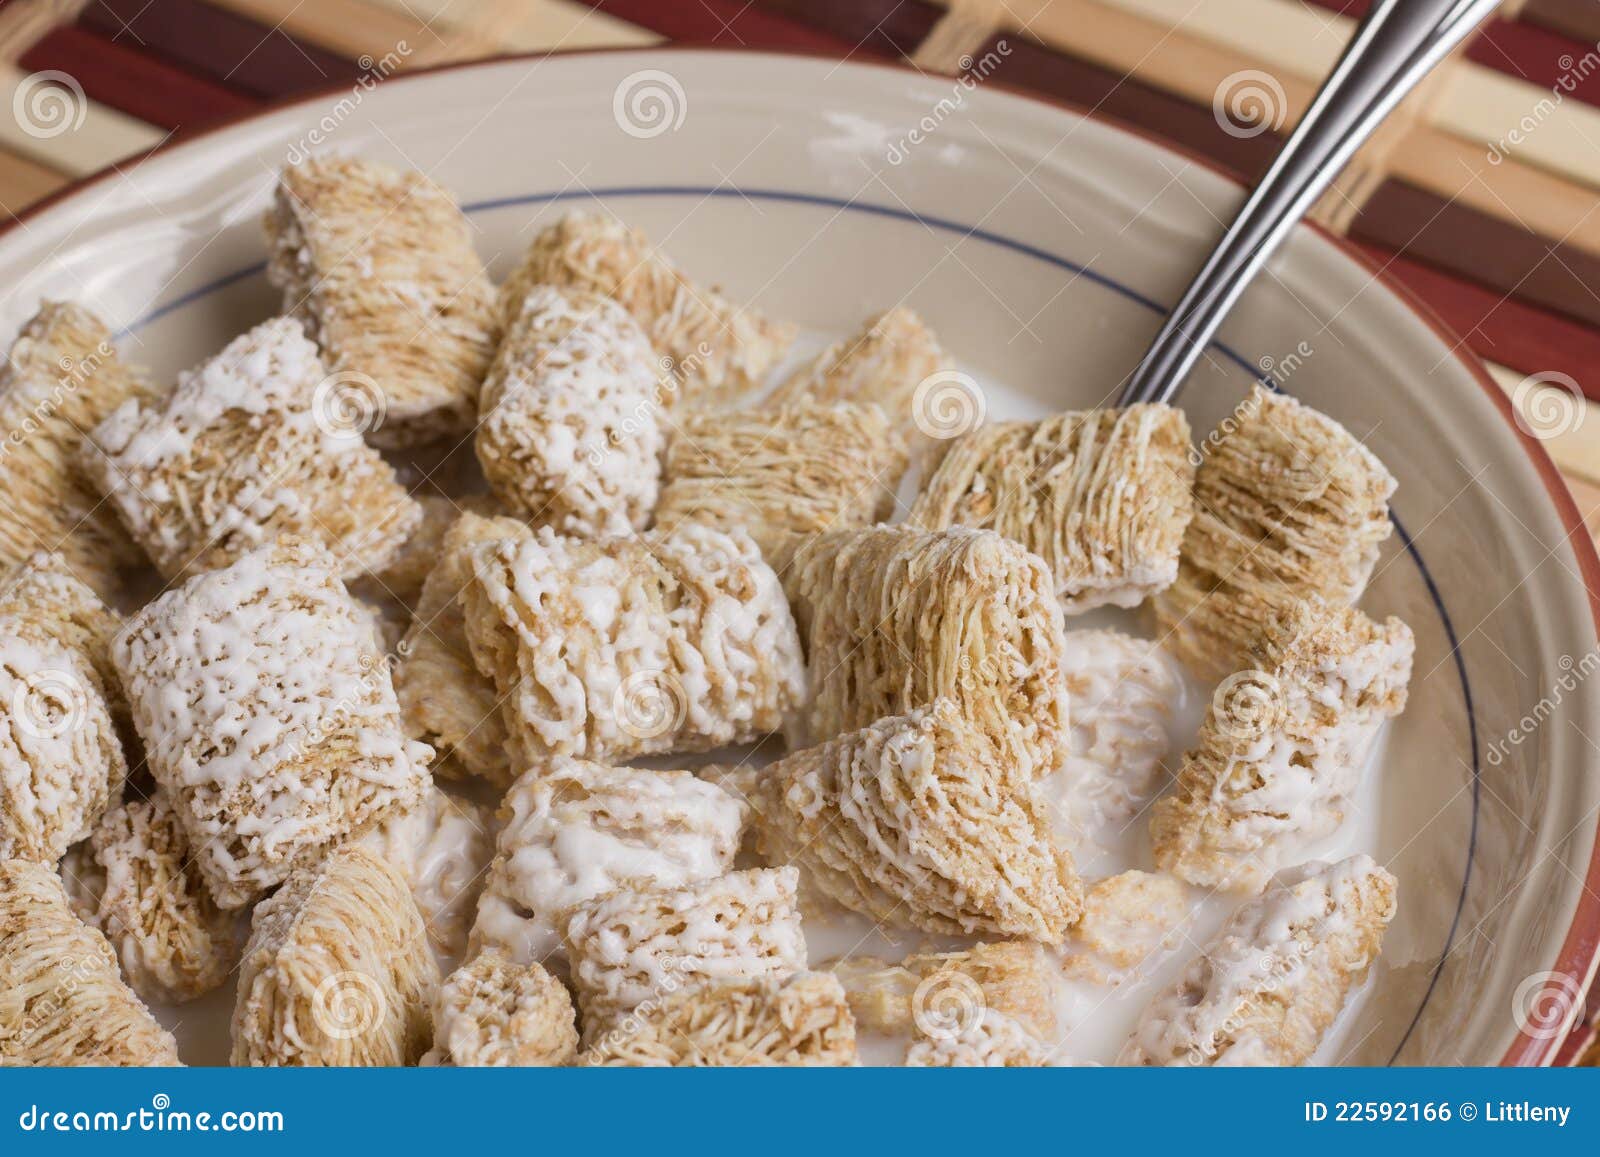 frosted-wheat-cereal-bowl-22592166.jpg